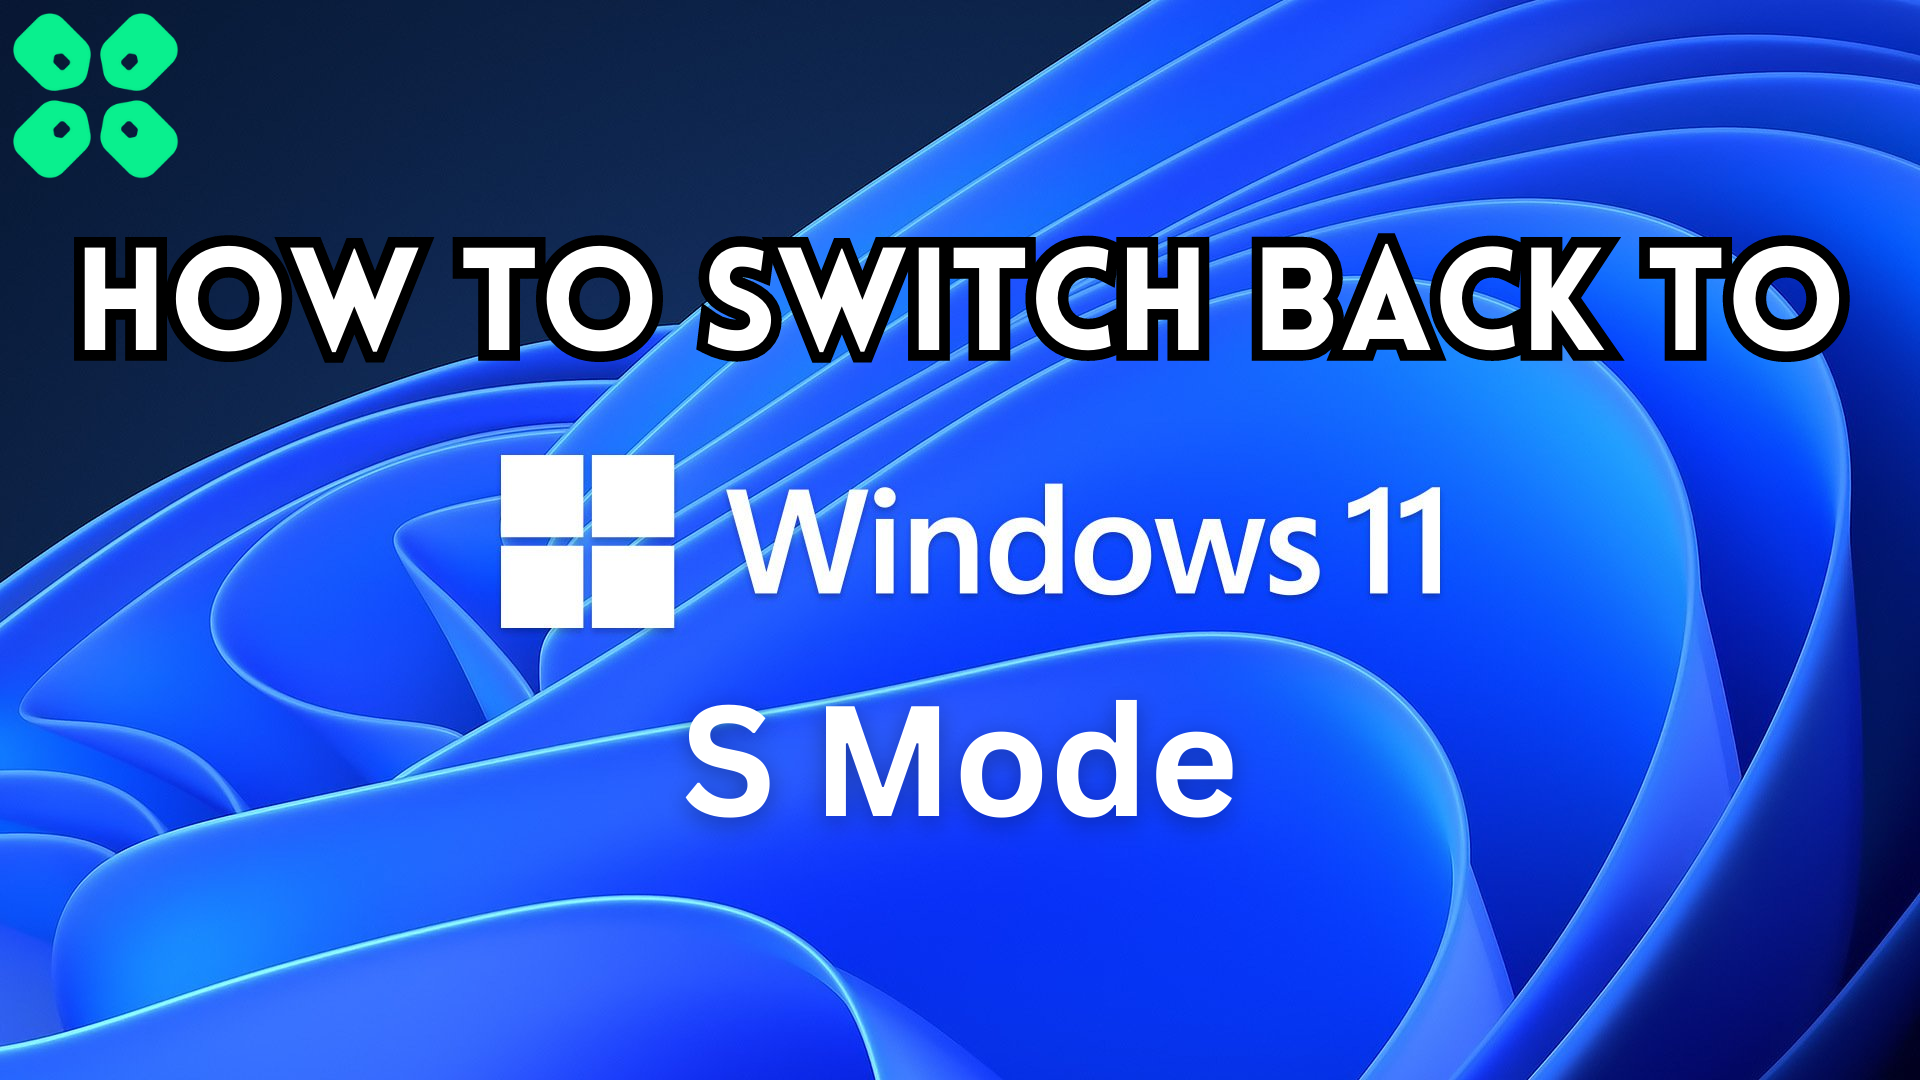 How to Switch Back to Windows 11 S Mode